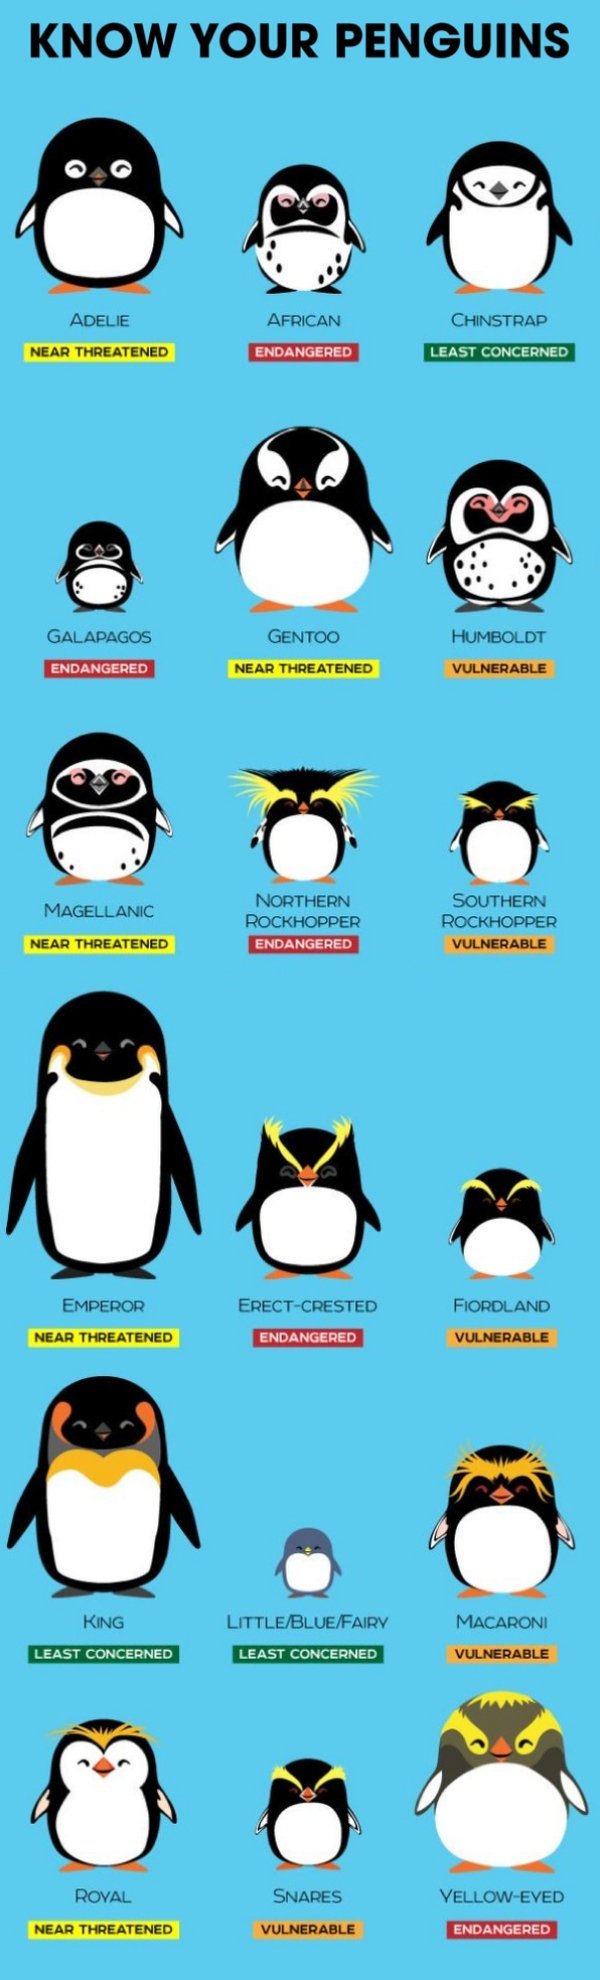 Cool Charts and Graphs - cartoon - Know Your Penguins Adelie Near Threatened Galapagos Endangered Magellanic Near Threatened Emperor Near Threatened King Least Concerned Royal Near Threatened African Endangered Gentoo Near Threatened Northern